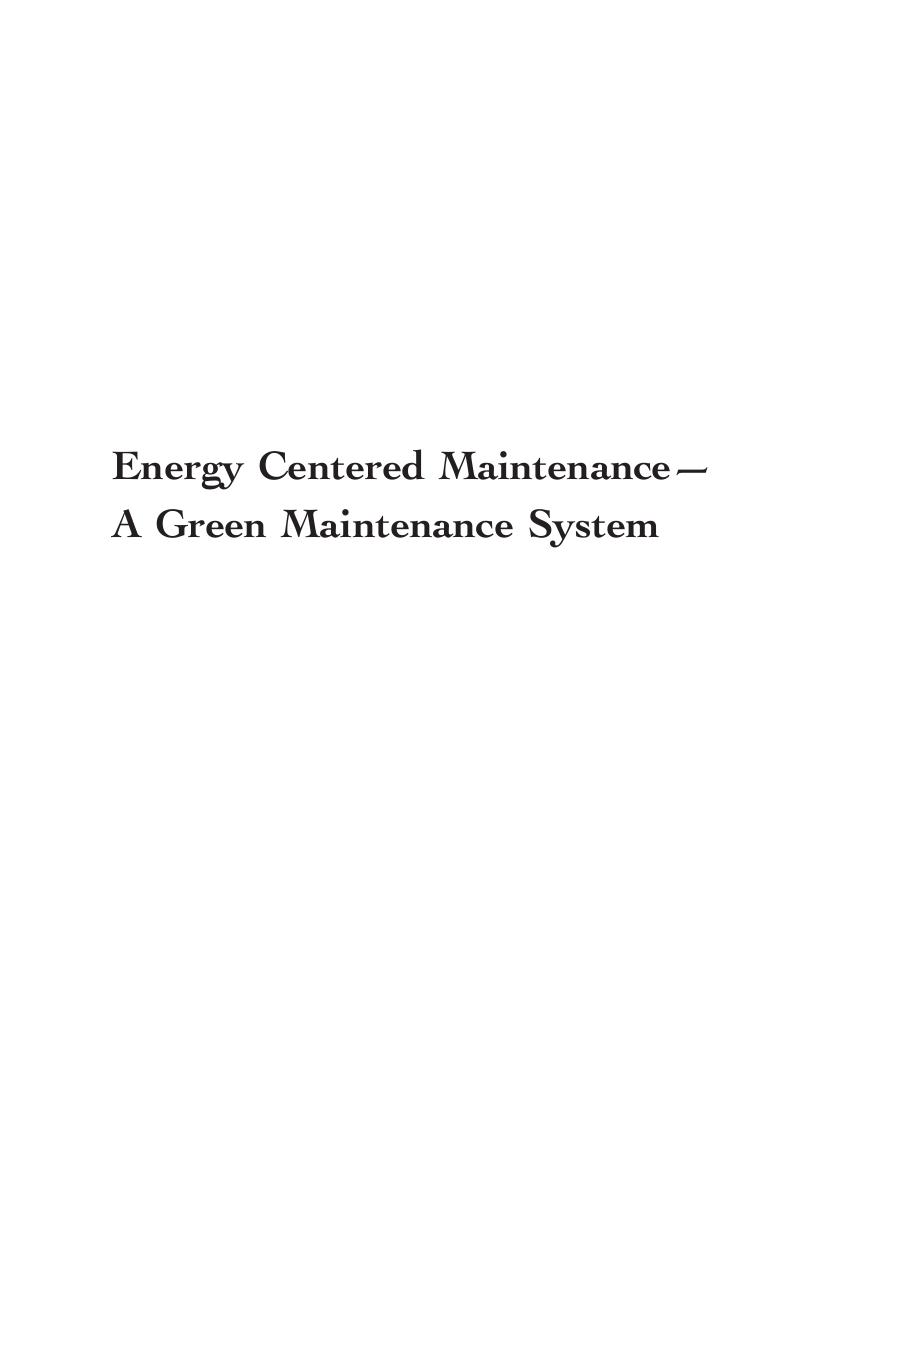 Energy Centered Maintenance: A Green Maintenance System by Marvin T. Howell; Fadi Alshakhshir